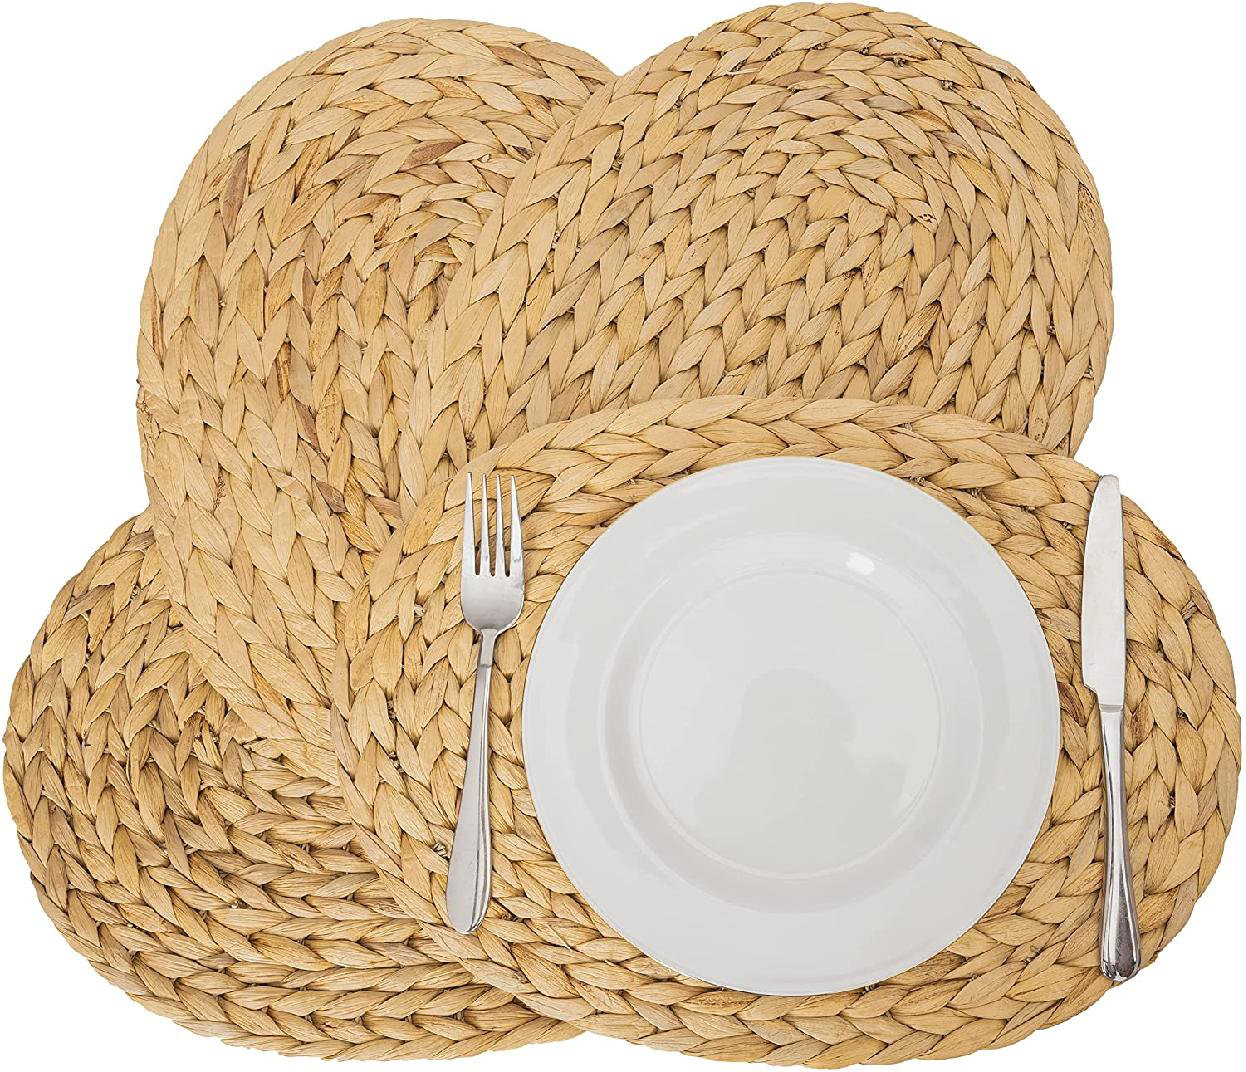 Set of 4 Natural Rattan Jute Charger Plates for Dining Table - 11.8” Straw Plate Chargers Heat Resistant Braided Seagrass Water Hyacinth Placemats Round Woven Placemats 